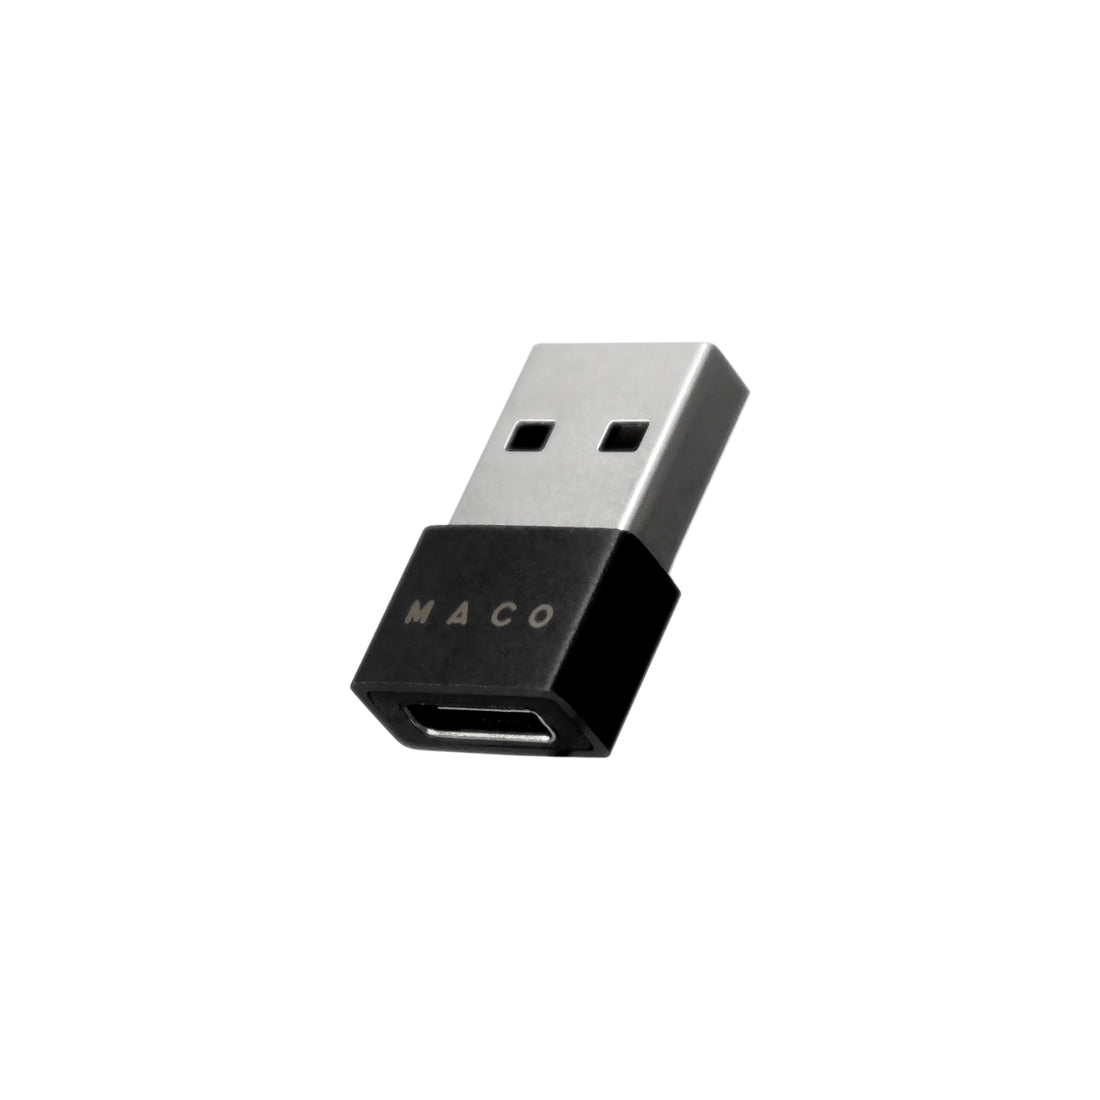 Maco USB A to C Adapter - Storming Gravity